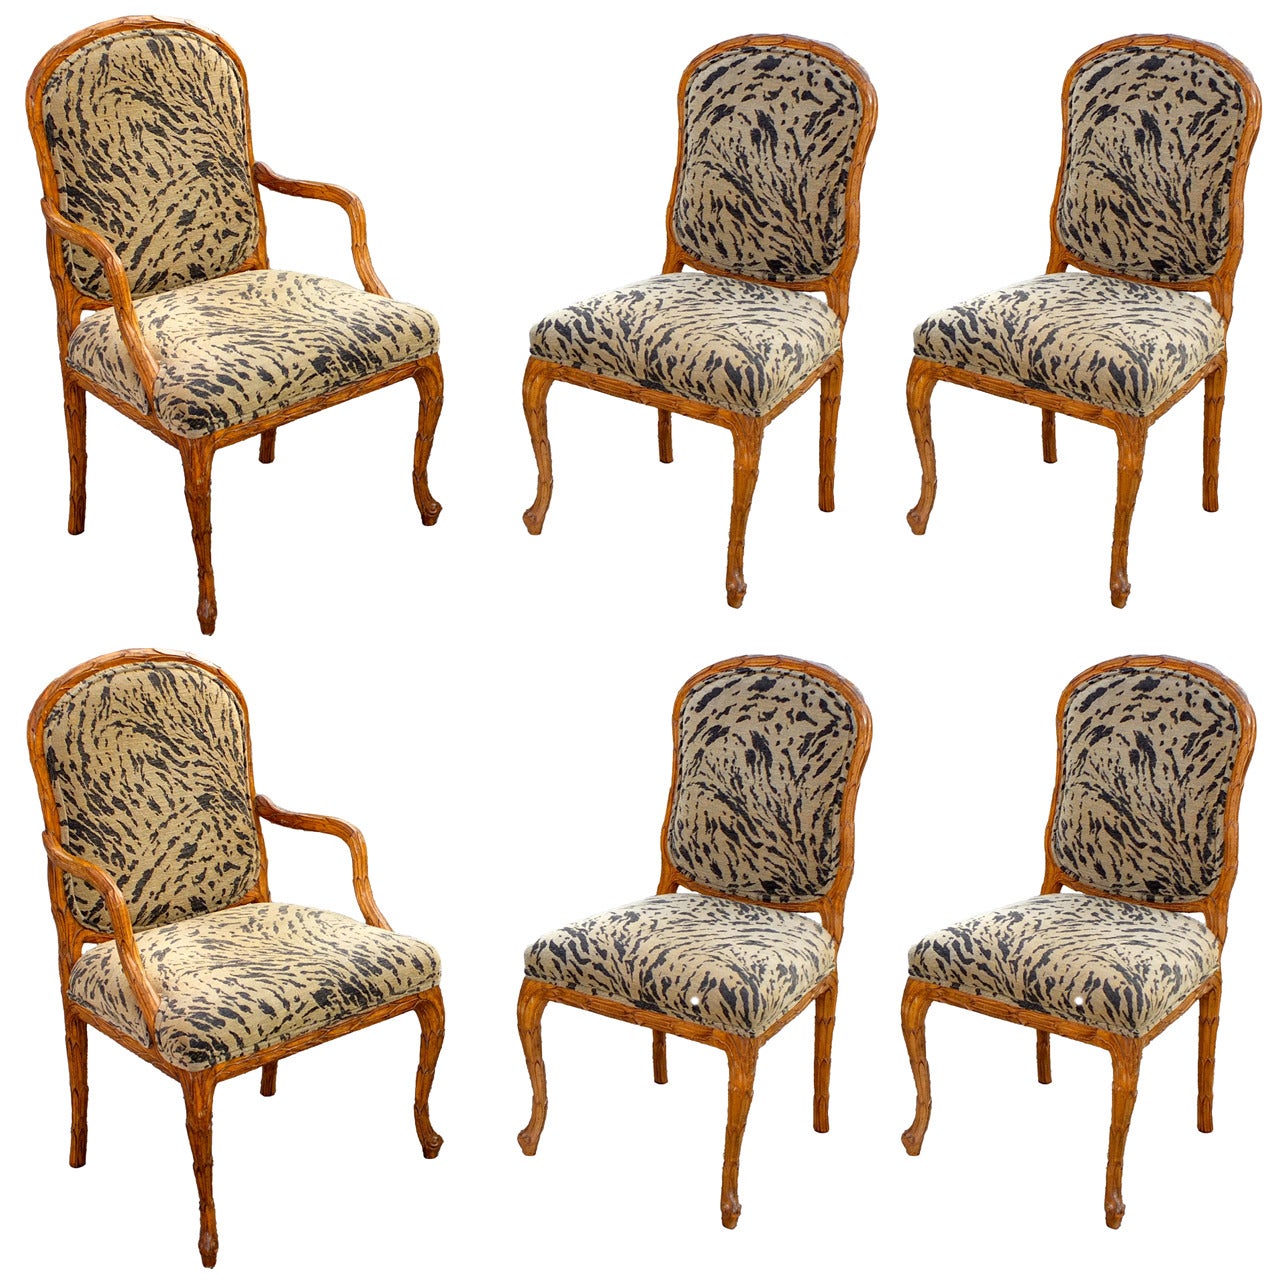 Set of 6 Palm Frond Carved Chairs in the Style of Serge Roche